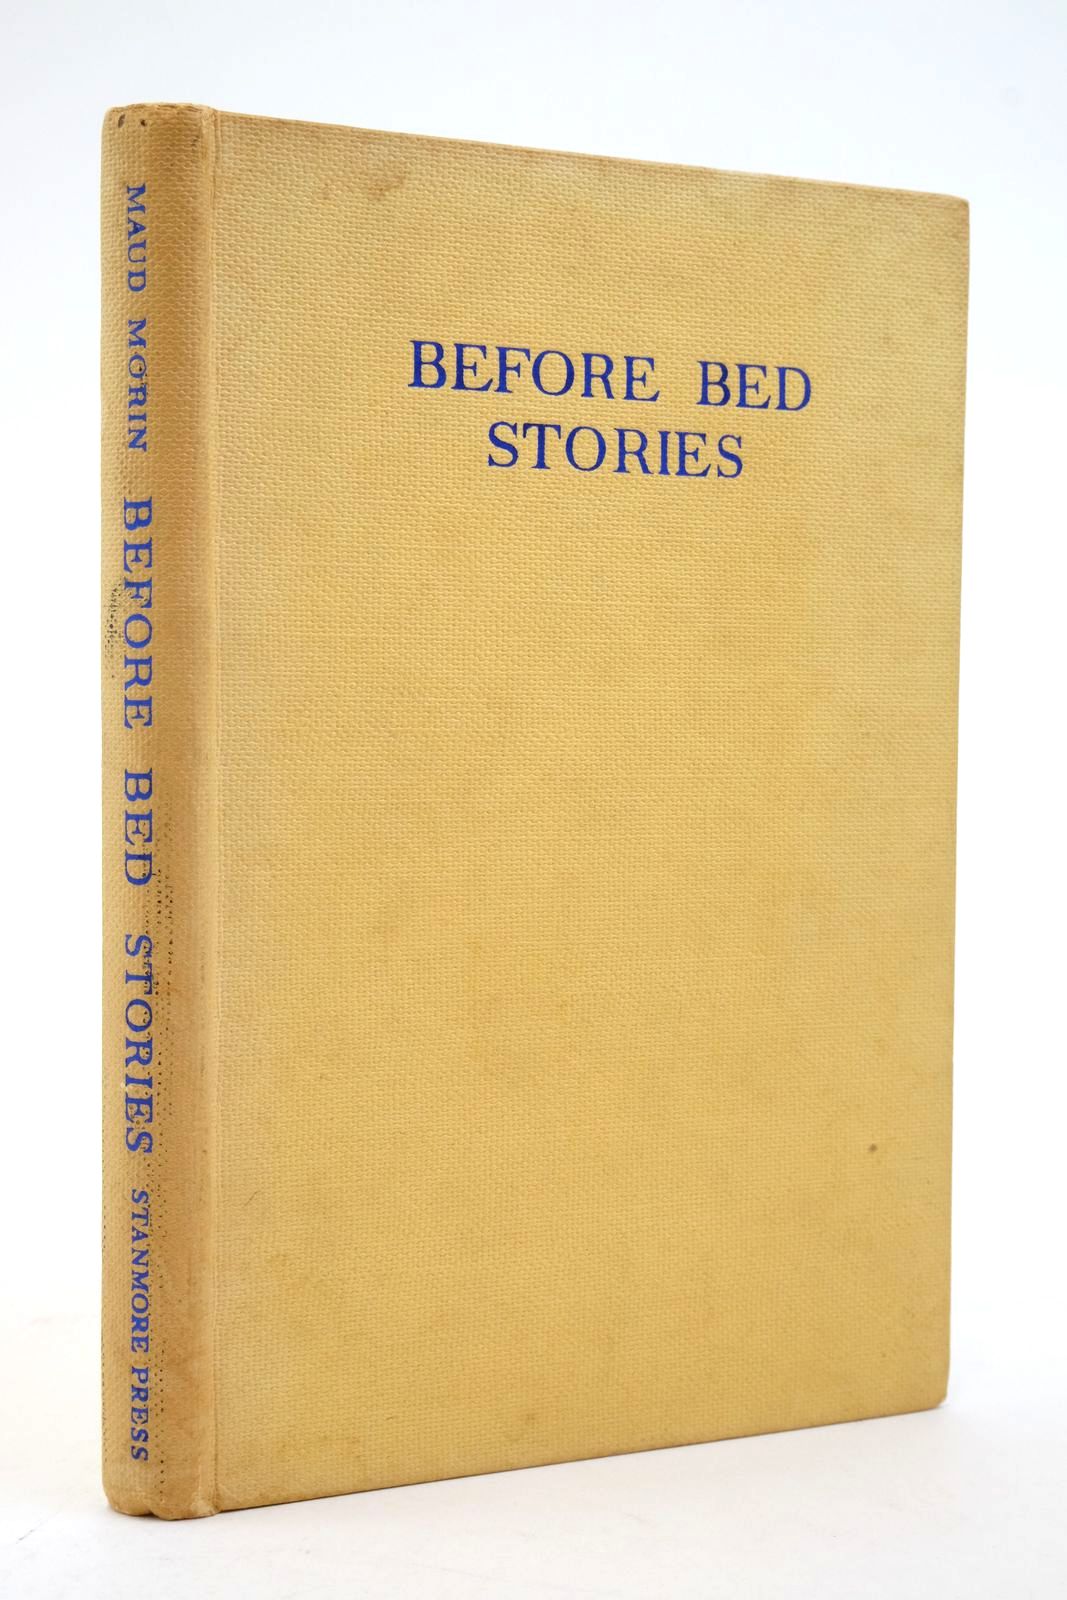 Photo of BEFORE BED STORIES written by Morin, Maud illustrated by Heap, Jean Walmsley published by The Stanmore Press (STOCK CODE: 2138893)  for sale by Stella & Rose's Books